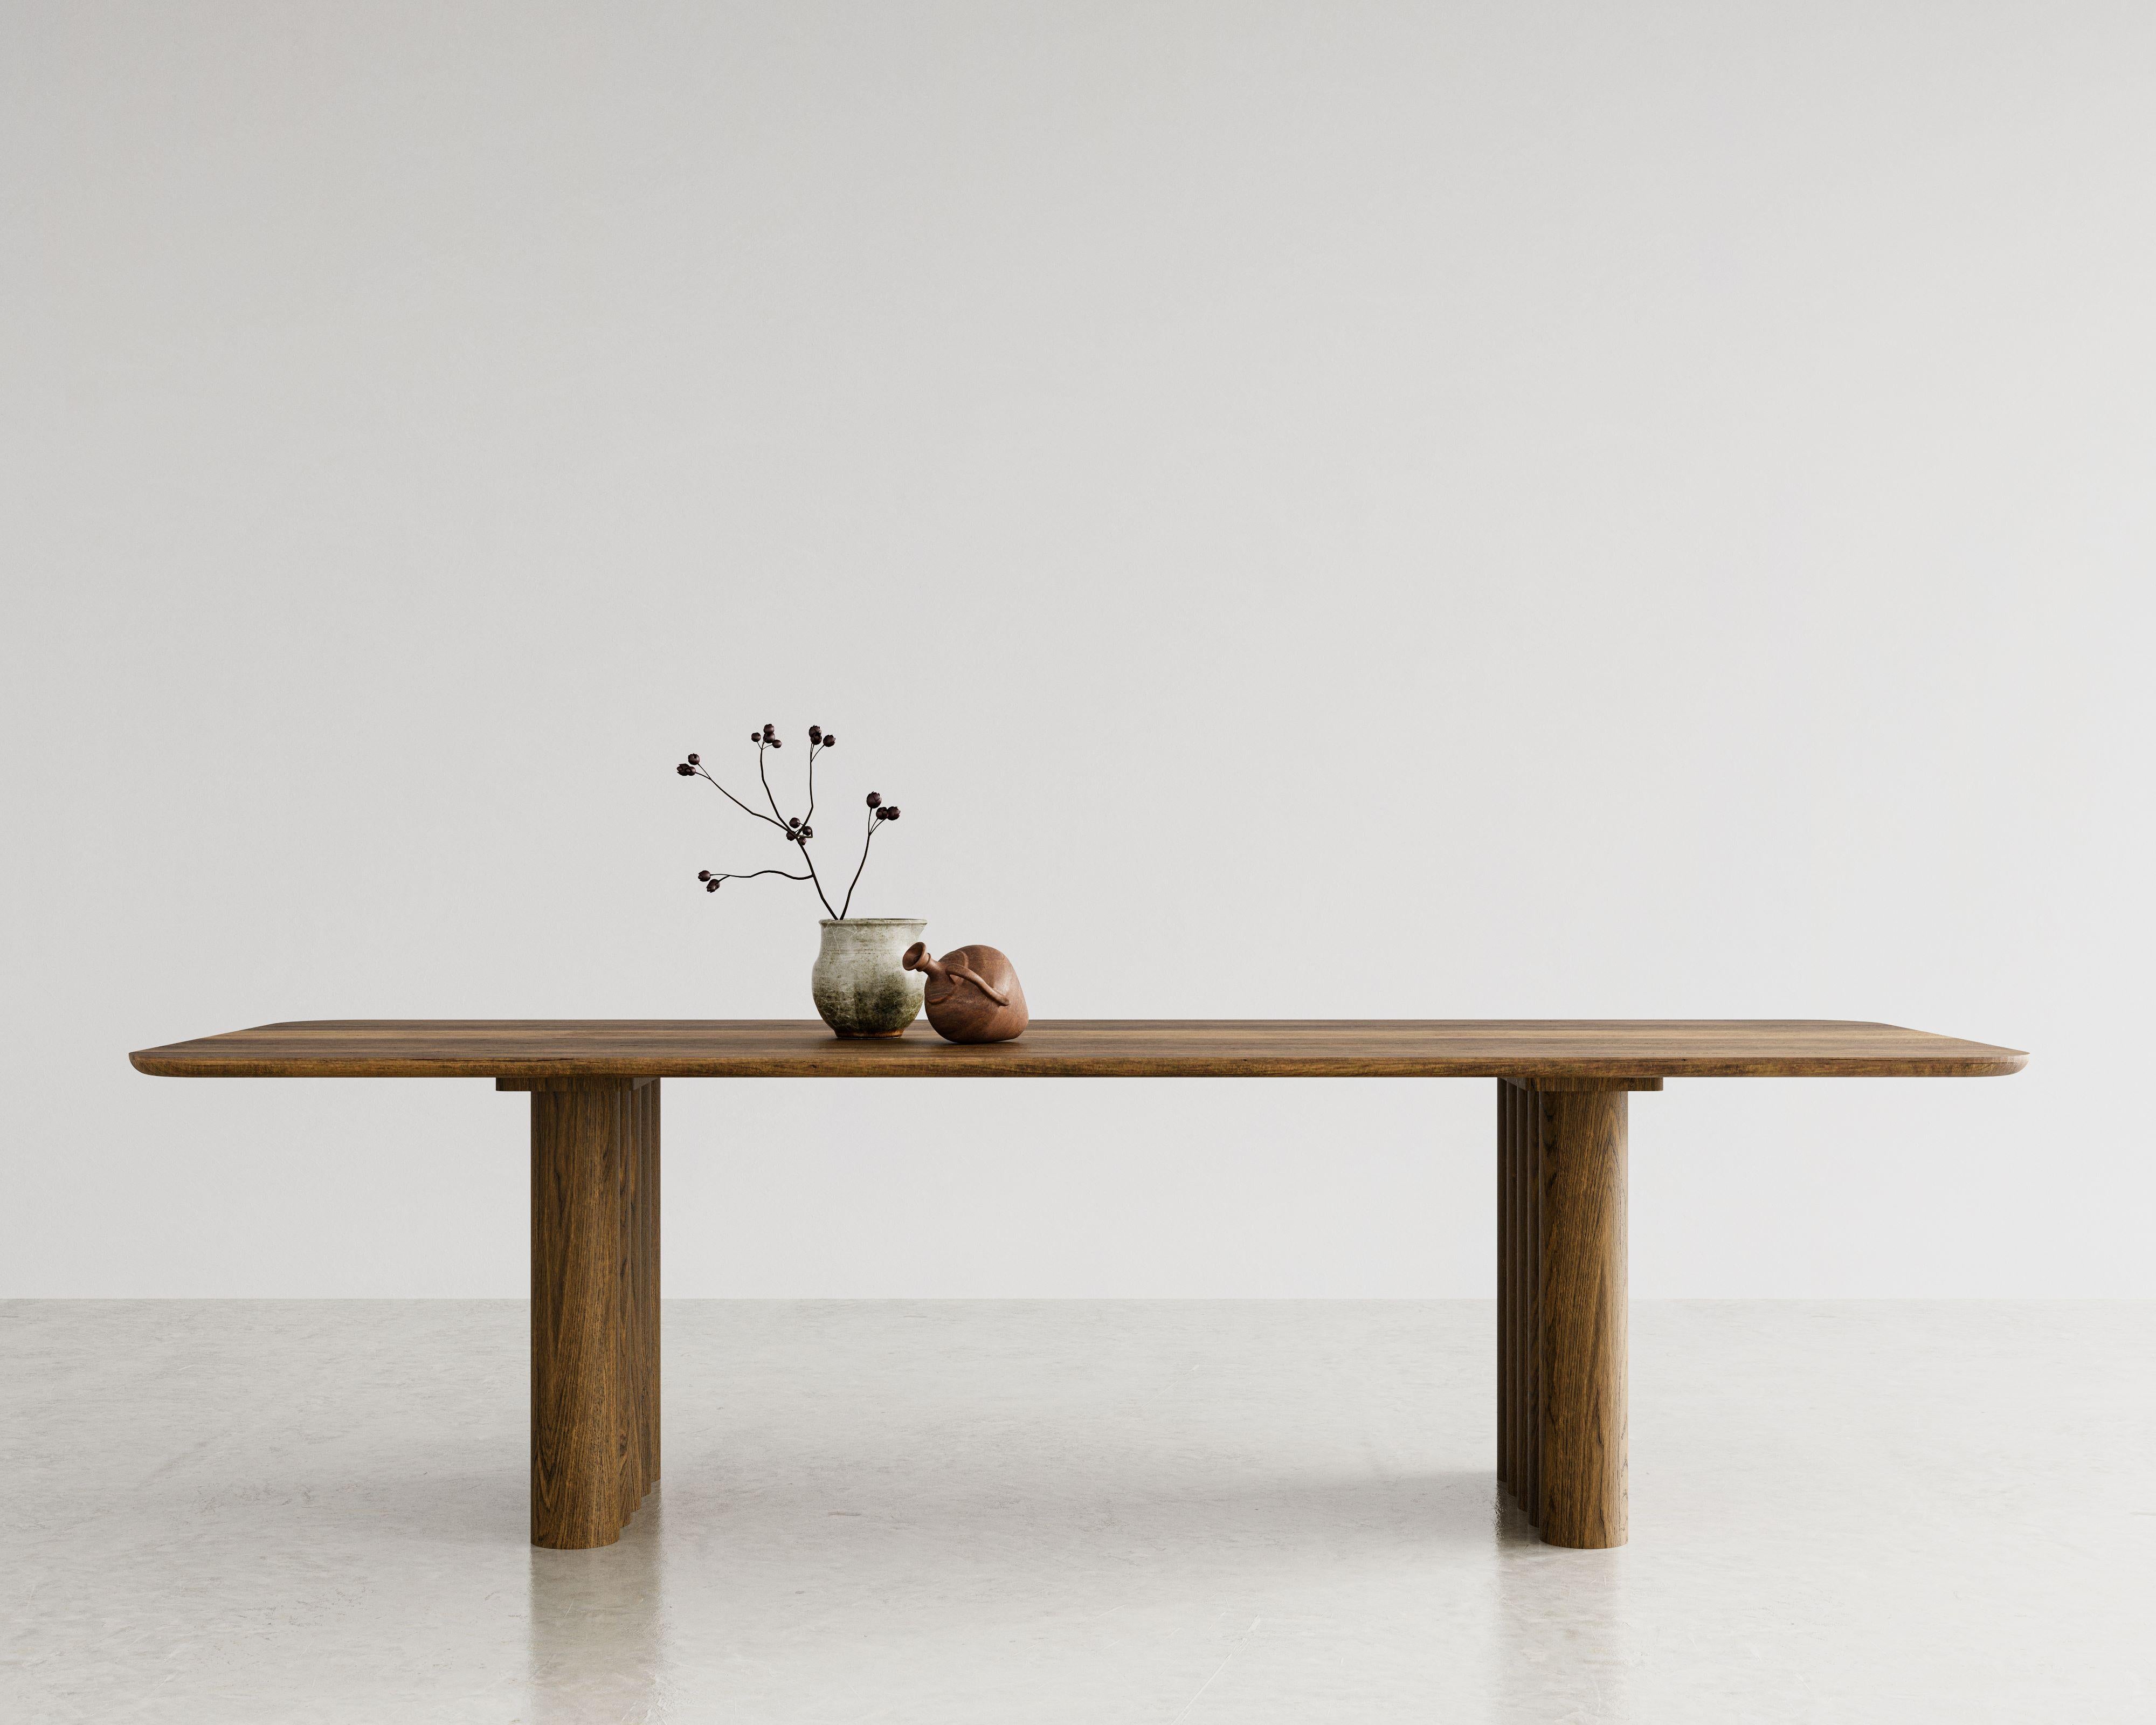 PLUSH dining table, rectangular, 340 cm.
Solid wood table top and legs. Handmade in Denmark. 
Signed by Jacob Plejdrup for DK3

Table's height: 72 or 74 cm
Sold model: 
Smoked Oak
Legs Thickness: 130 mm
Table top Thickness: 30 mm

Table top’s